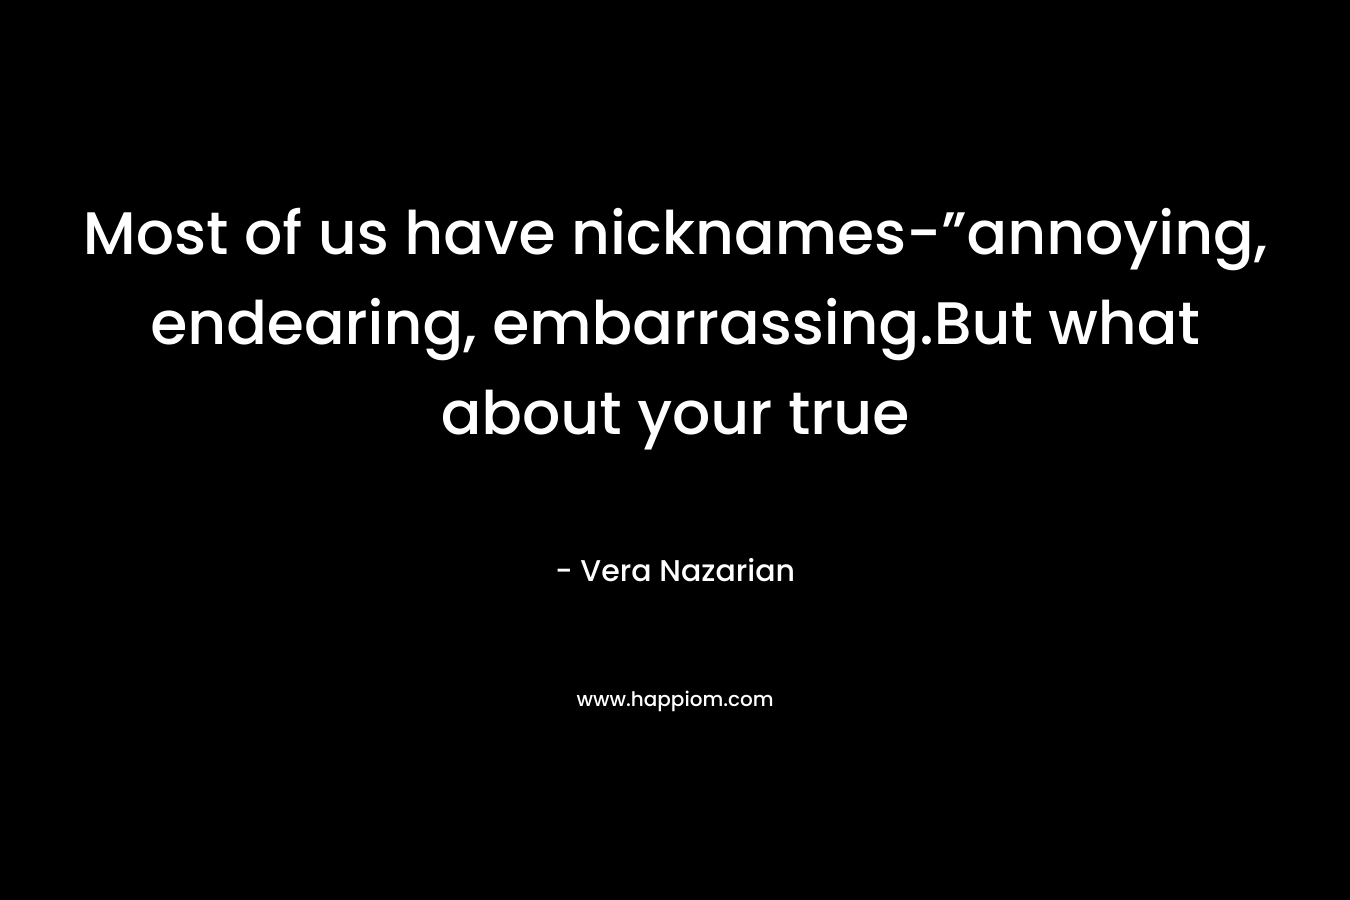 Most of us have nicknames-”annoying, endearing, embarrassing.But what about your true – Vera Nazarian